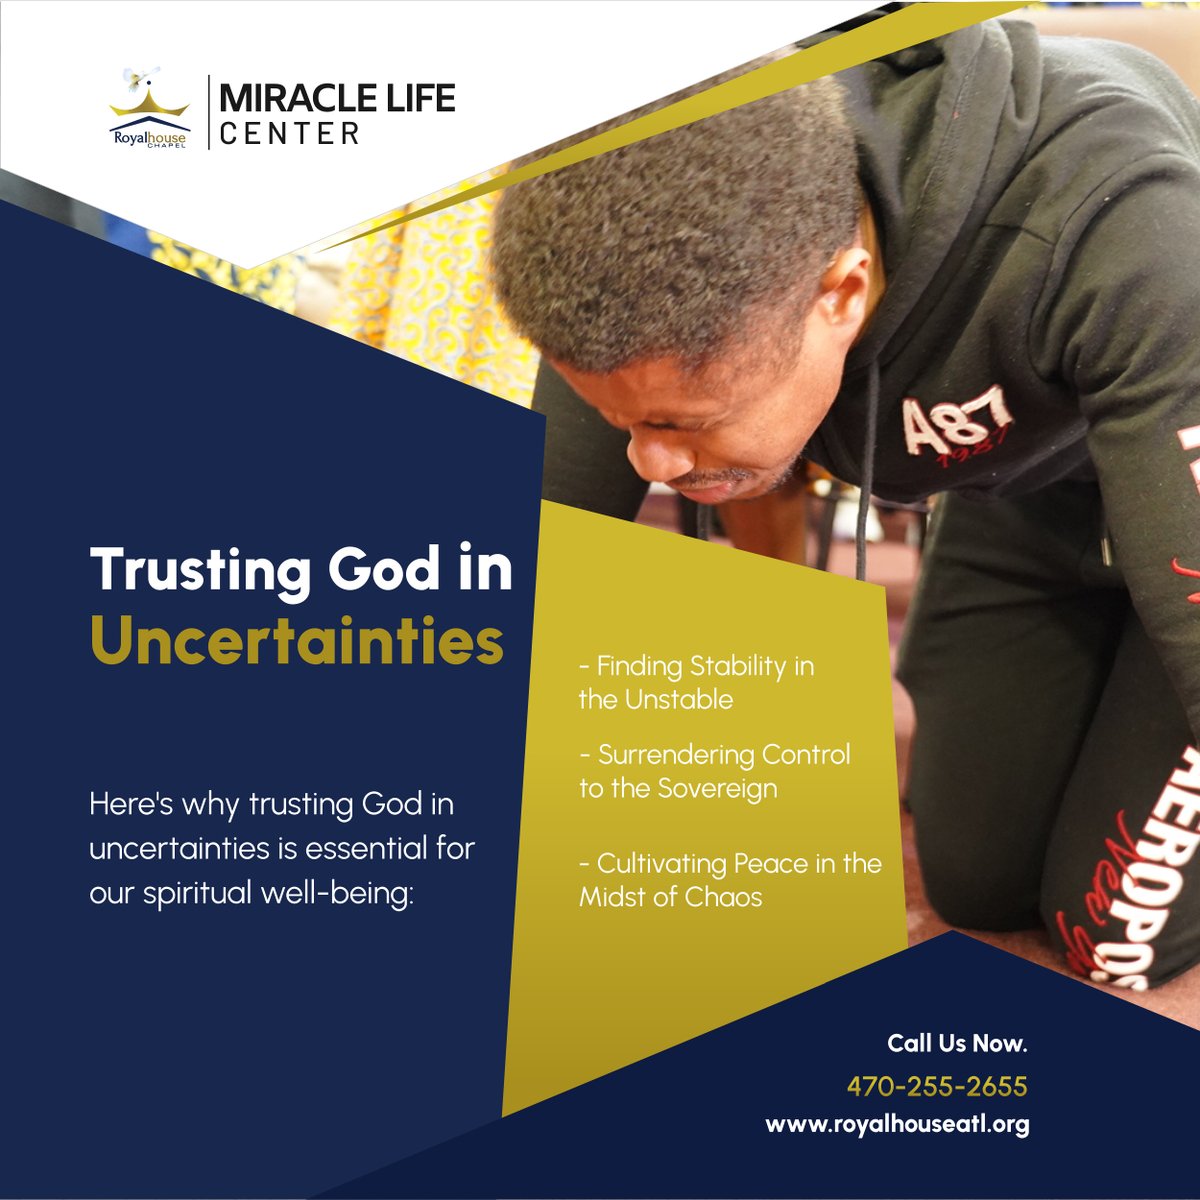 If you're struggling to trust God in uncertainties or facing challenges that seem insurmountable, we invite you to join us in prayer and reflection. 

#TuckerGA #ReligiousOrganization #TrustGod